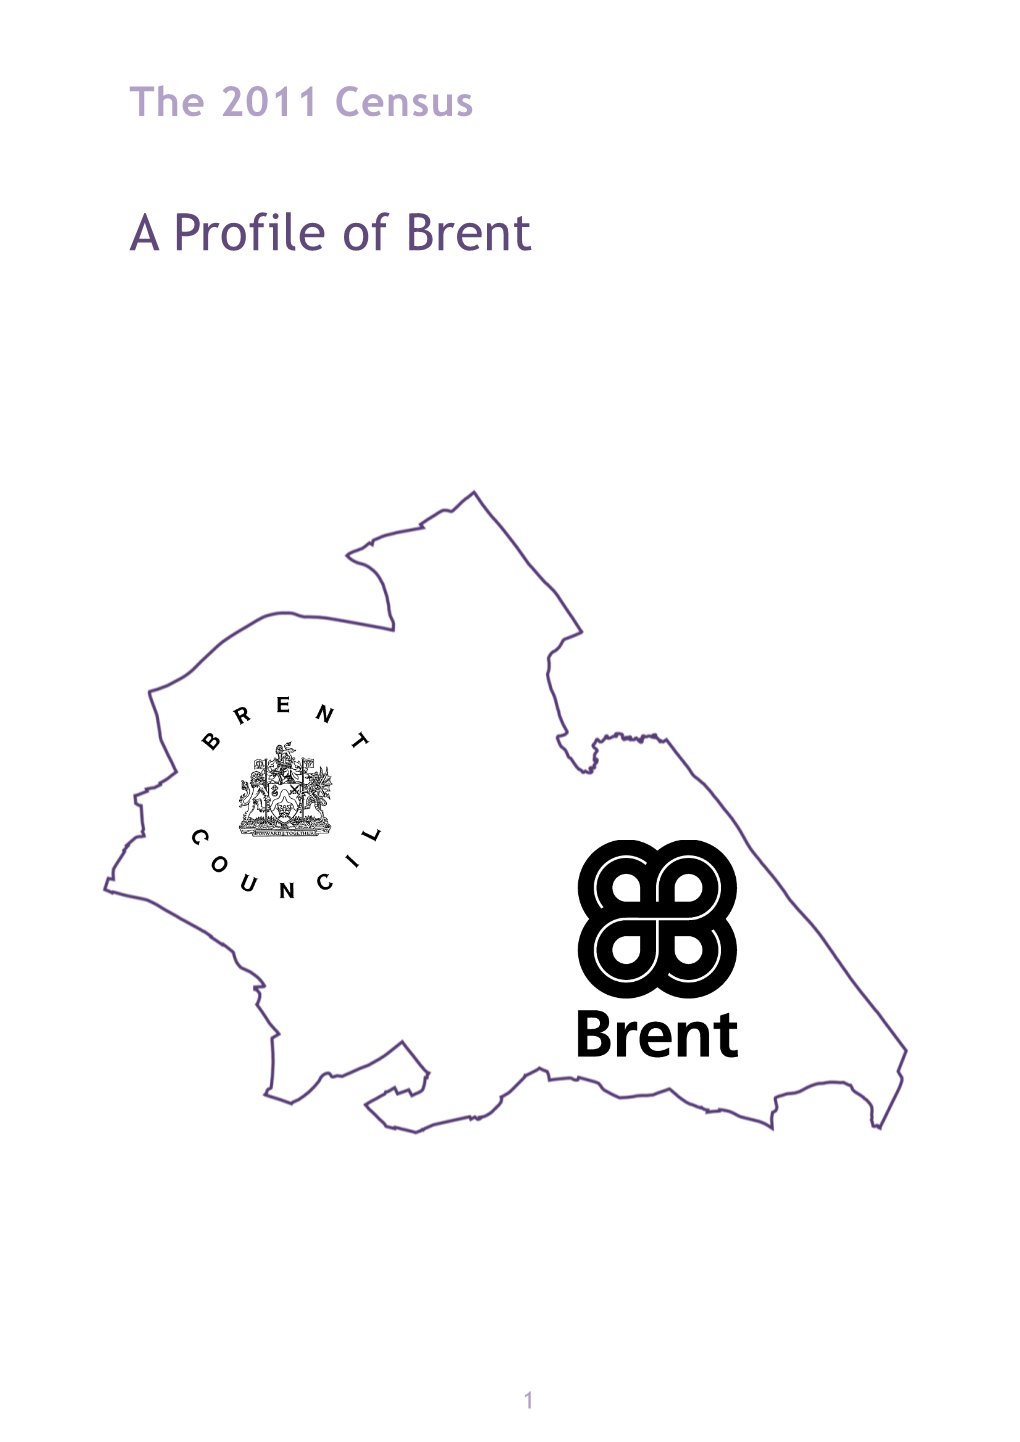 A Profile of Brent